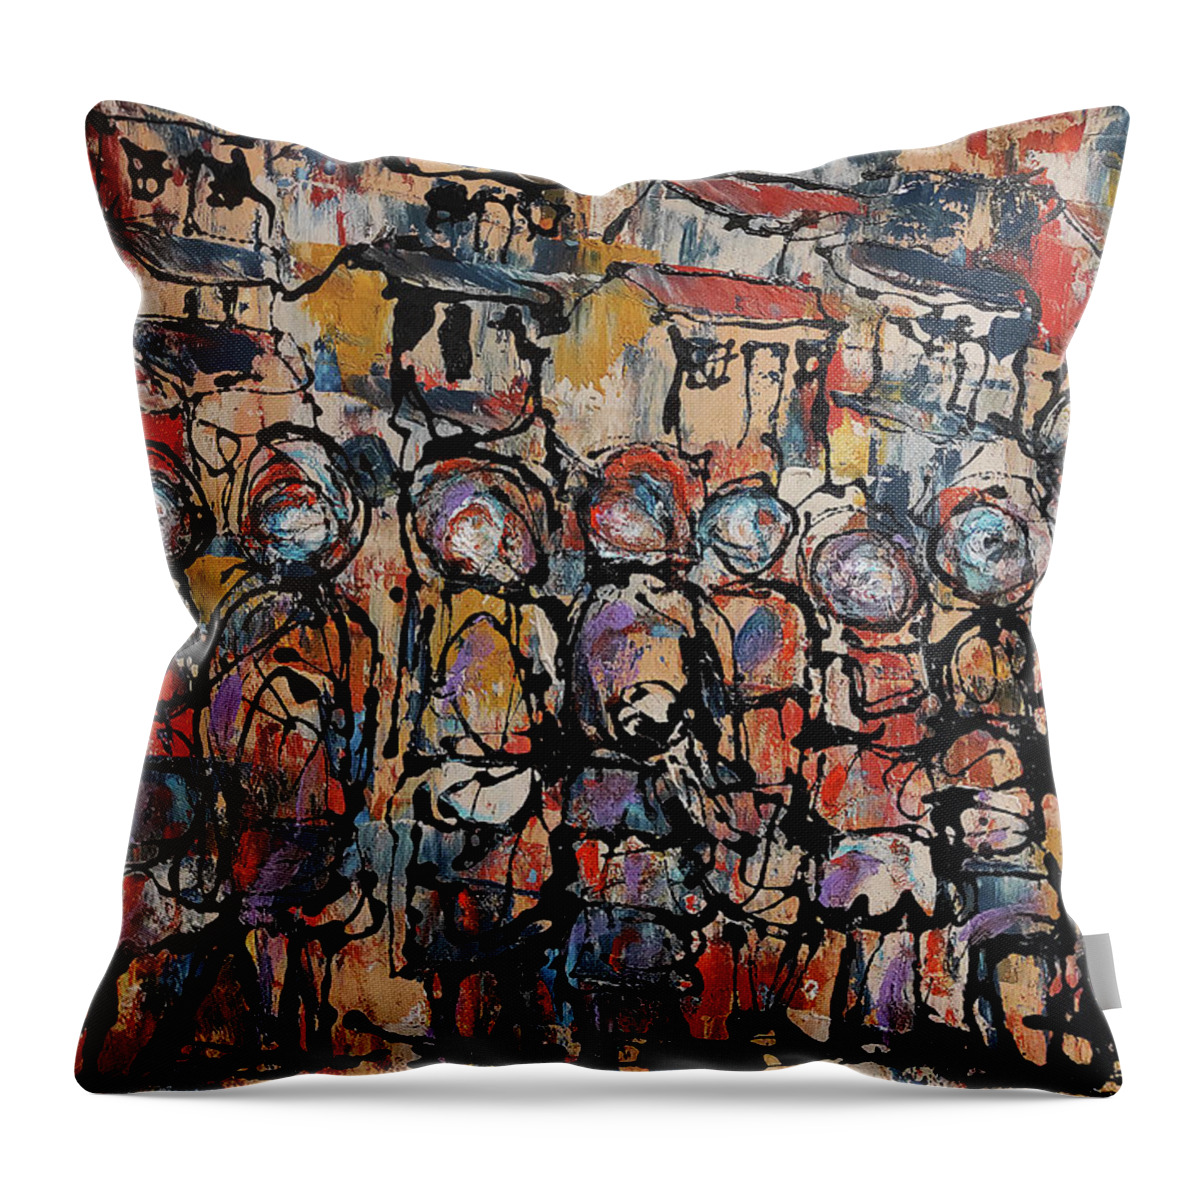 Moa Throw Pillow featuring the painting Little Boxes On The Hillside by Solomon Sekhaelelo